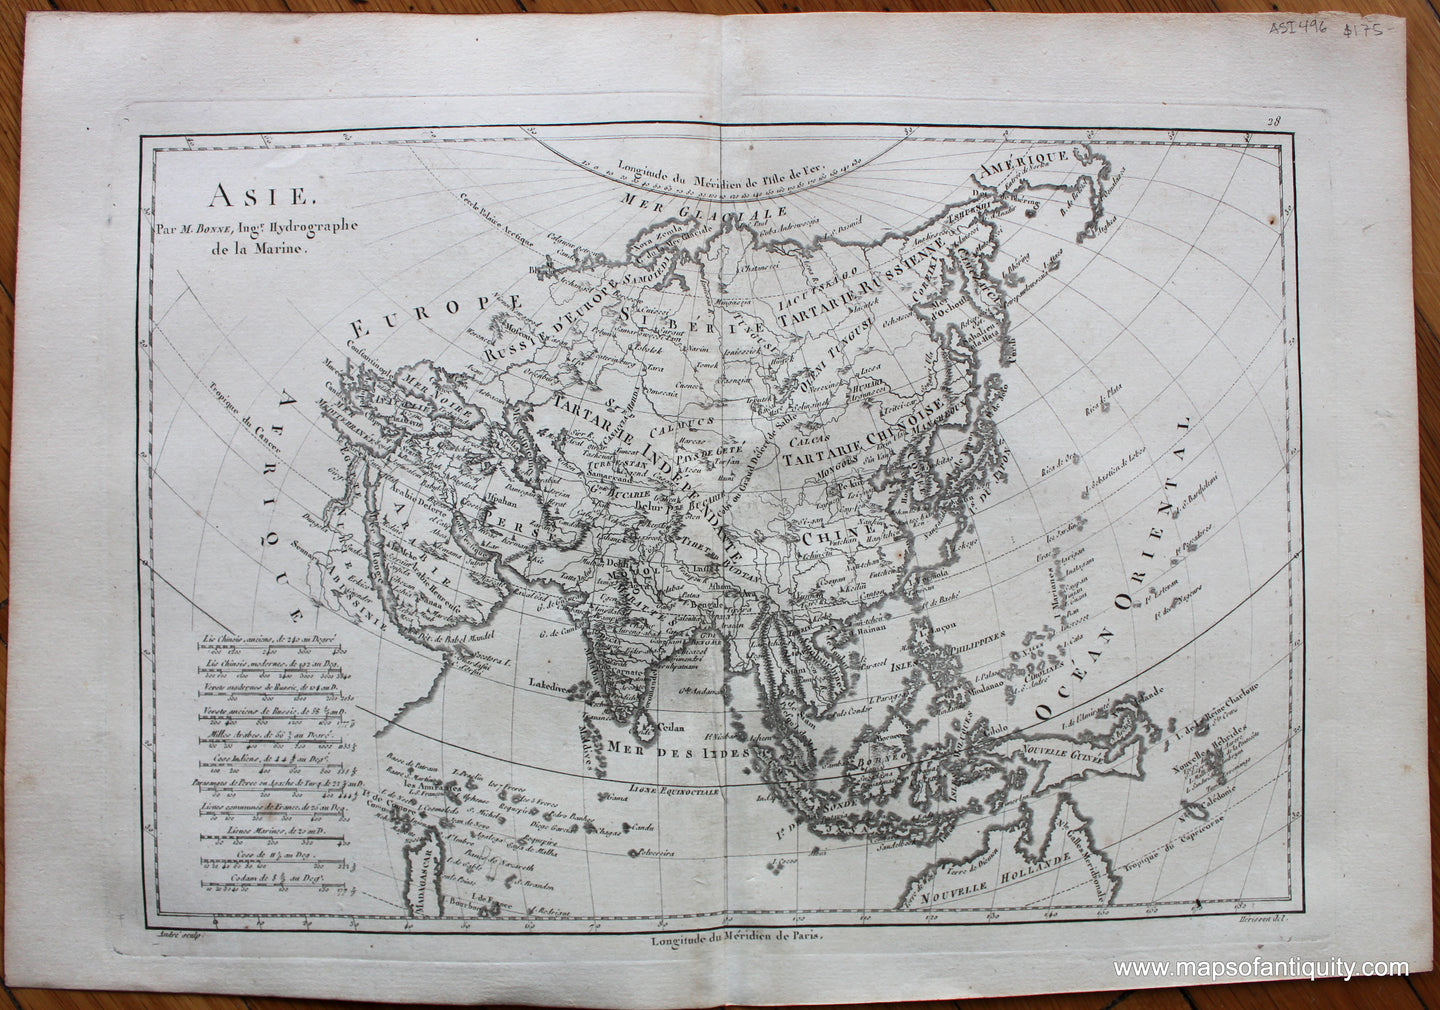 Genuine-Antique-Map-Asie-Asia--1787-Bonne-and-Desmarest-Maps-Of-Antiquity-1800s-19th-century